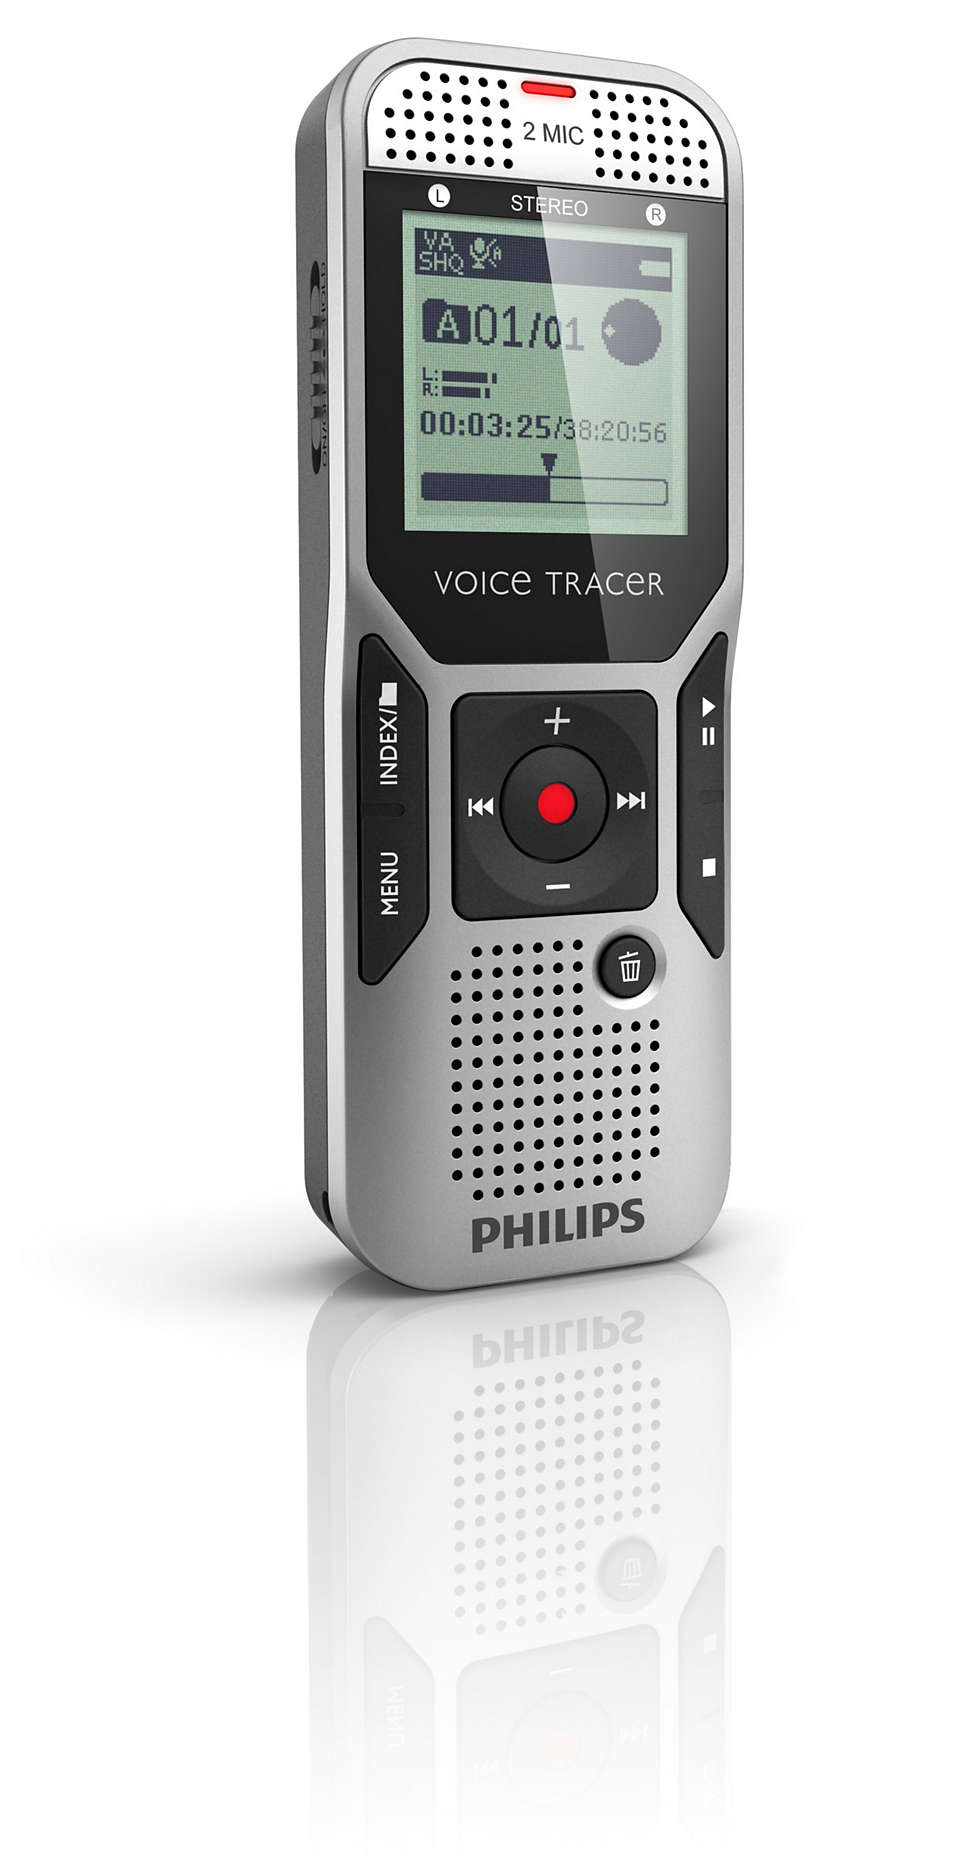 New! Philips DVT3200 Digital Voice Tracer and Recorder